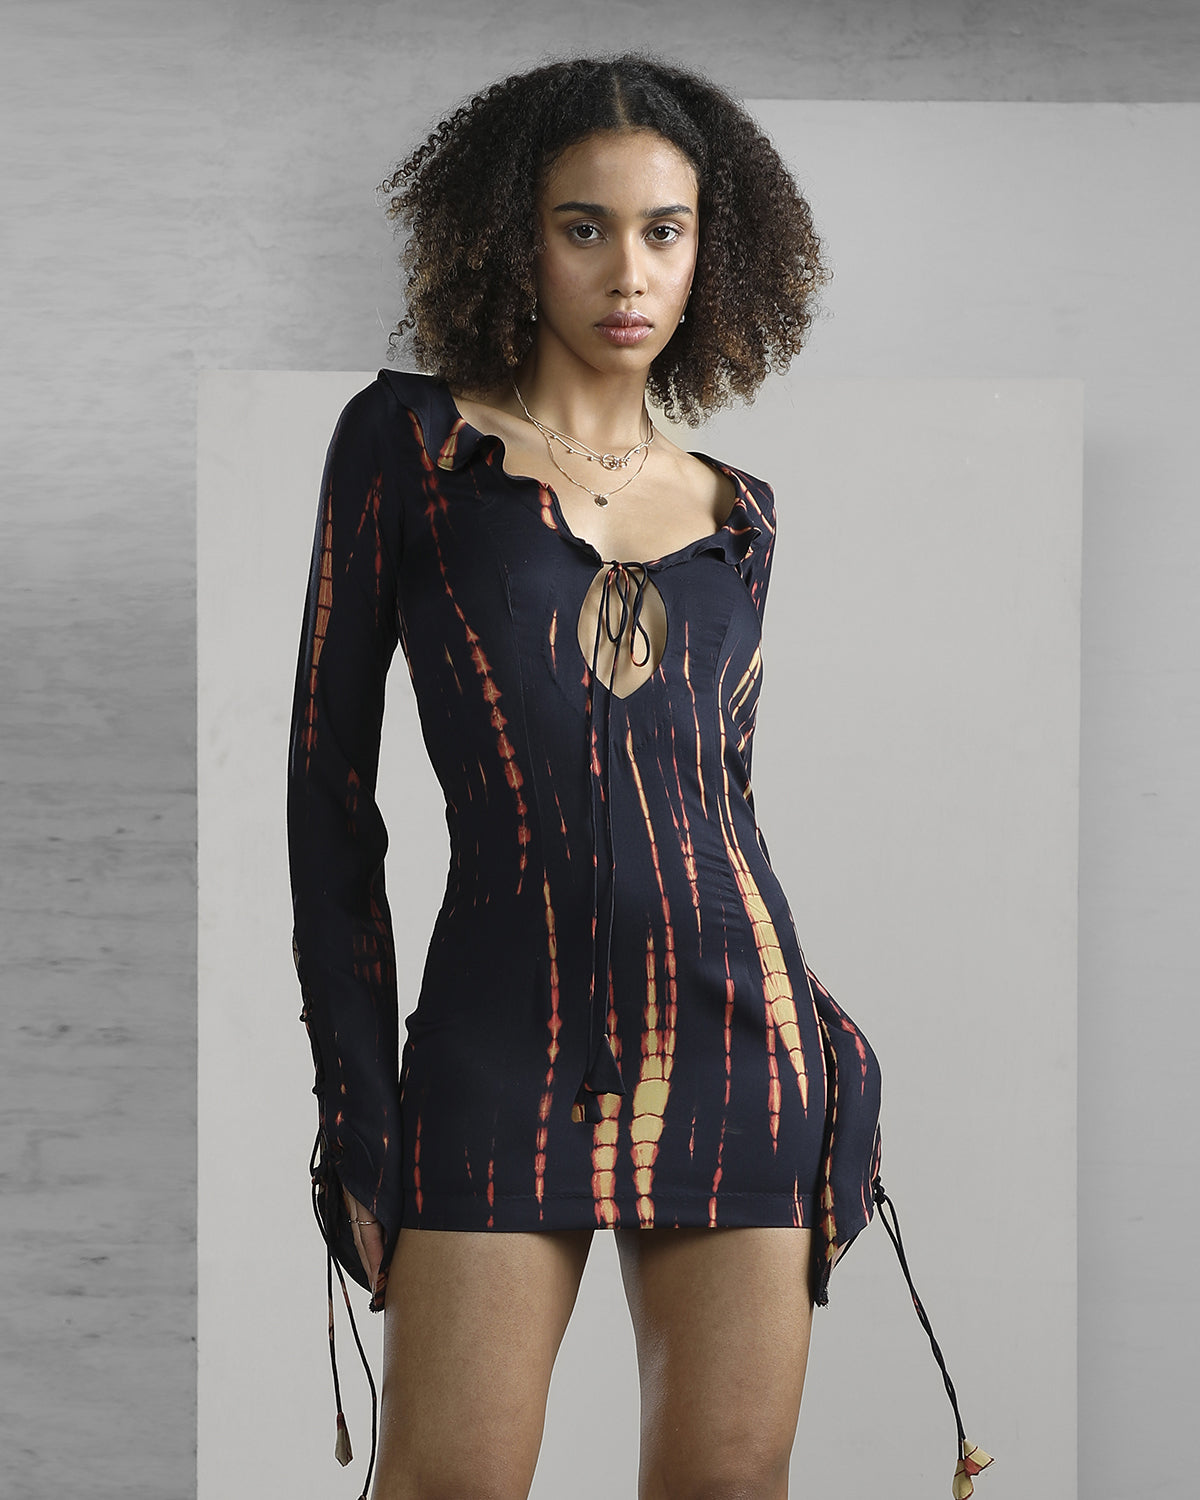 The Fire Dress: Conscious Ruffled Key Hole Neck Line With Adjustable Bell